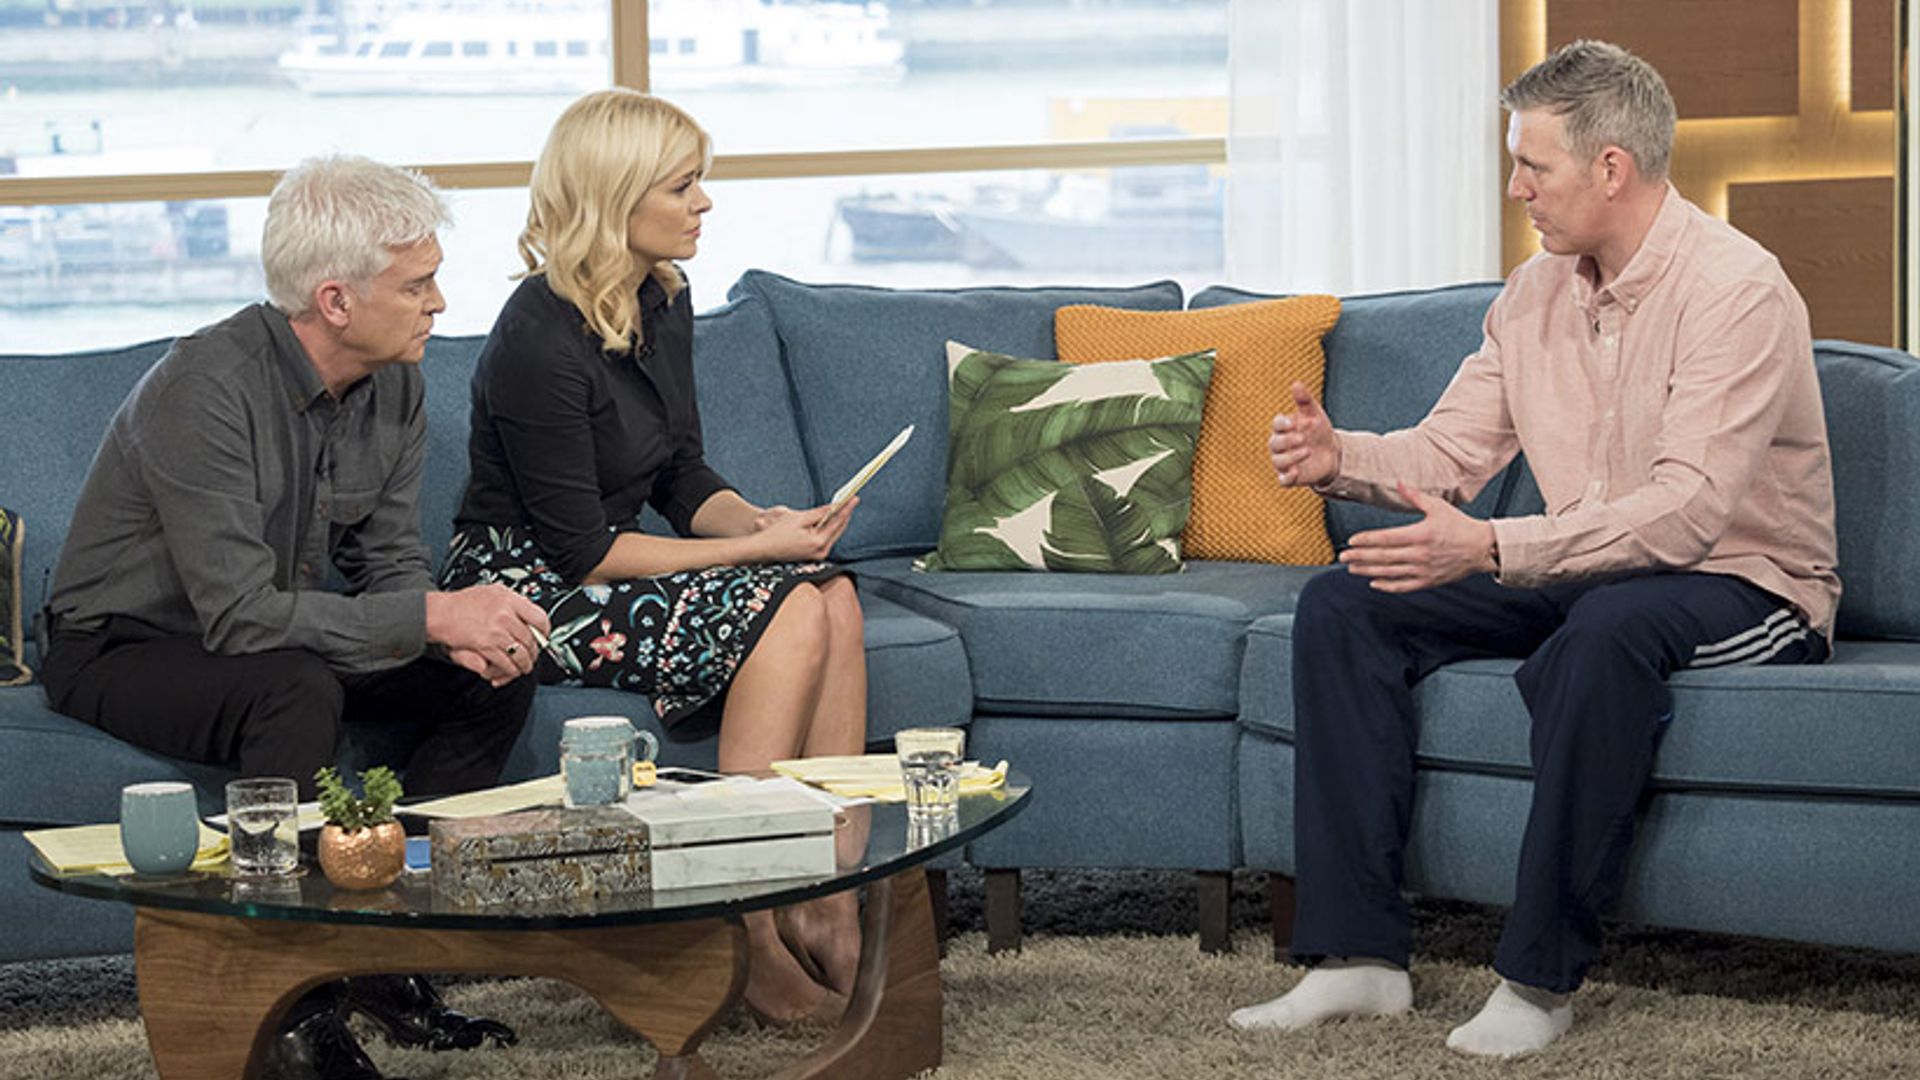 Holly Willoughby tears up in touching interview with hero who tried to save police officer in Westminster terror attack